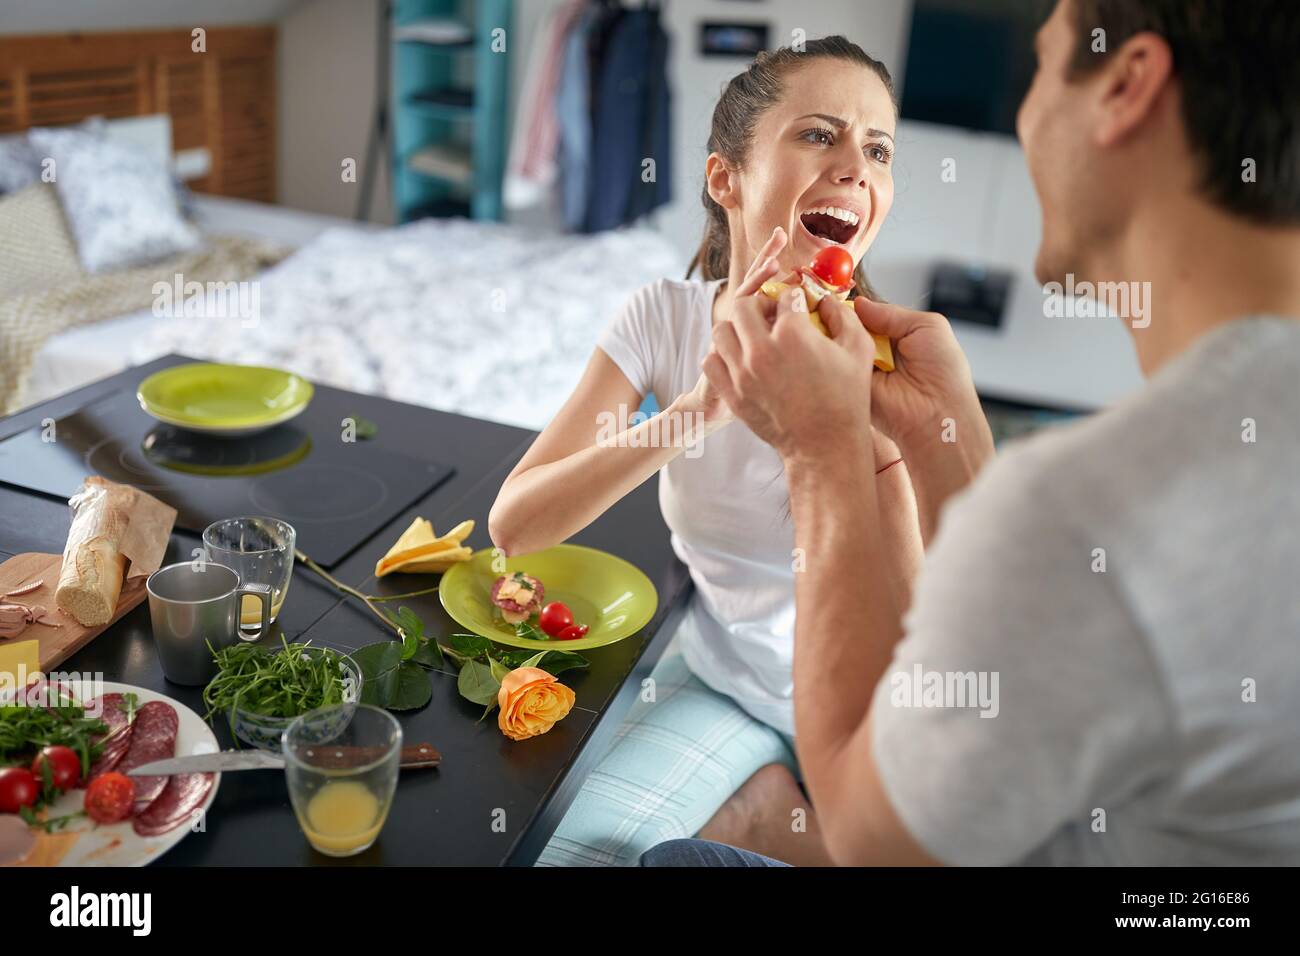 A young couple having a good time feeding each other while having a breakfast in a cheerful atmosphere at home. Love, together, breakfast, home Stock Photo